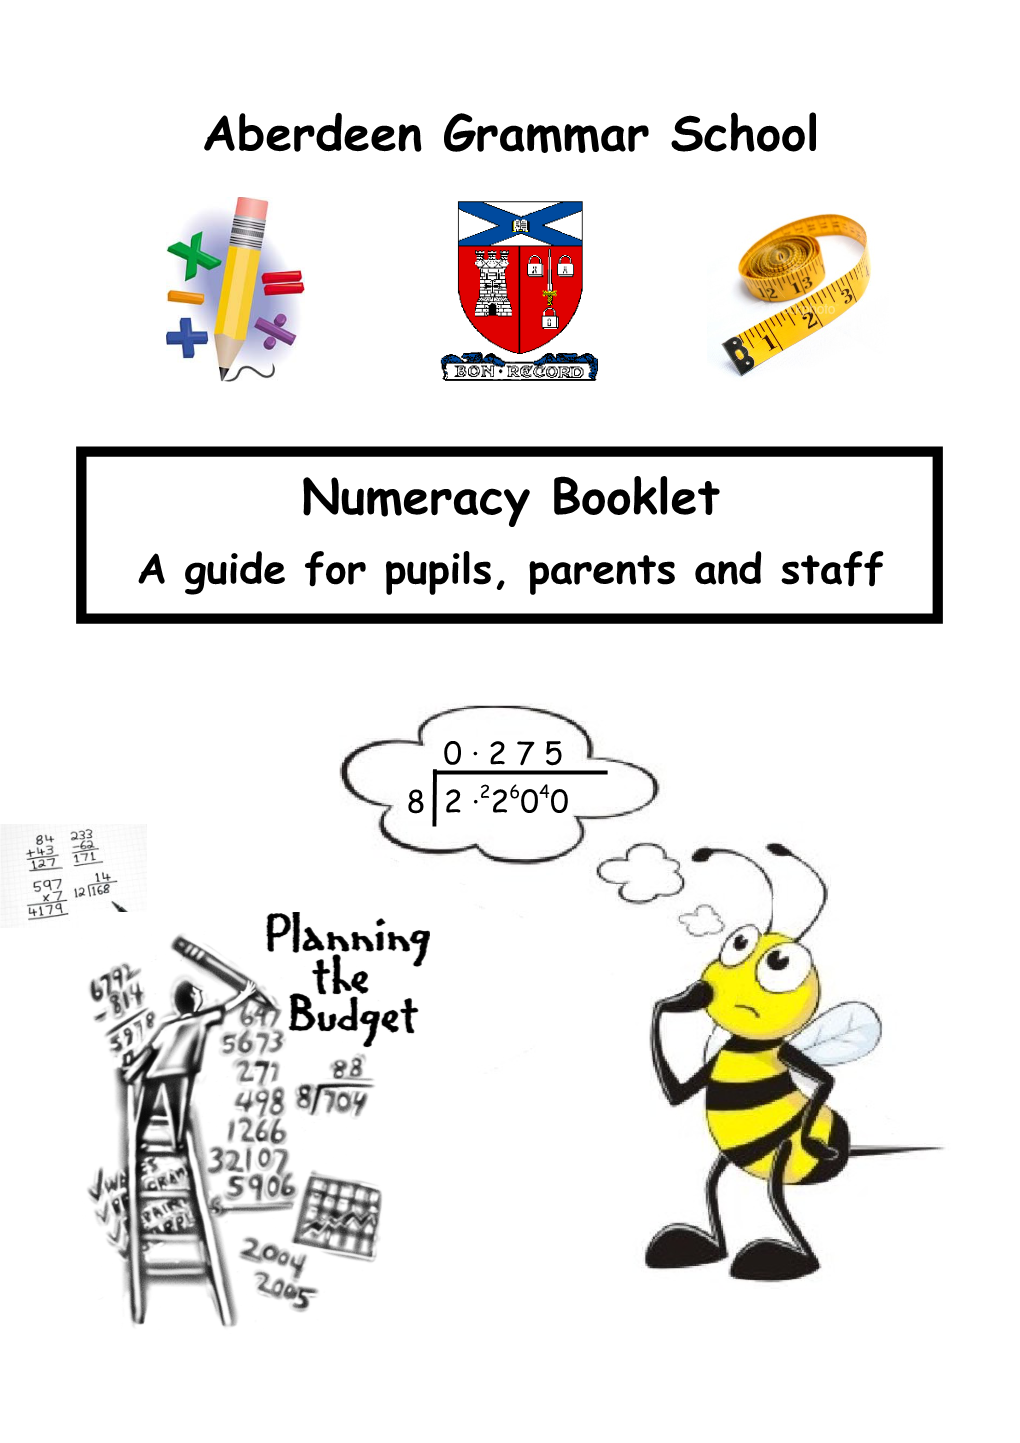 A Guide for Pupils, Parents and Staff